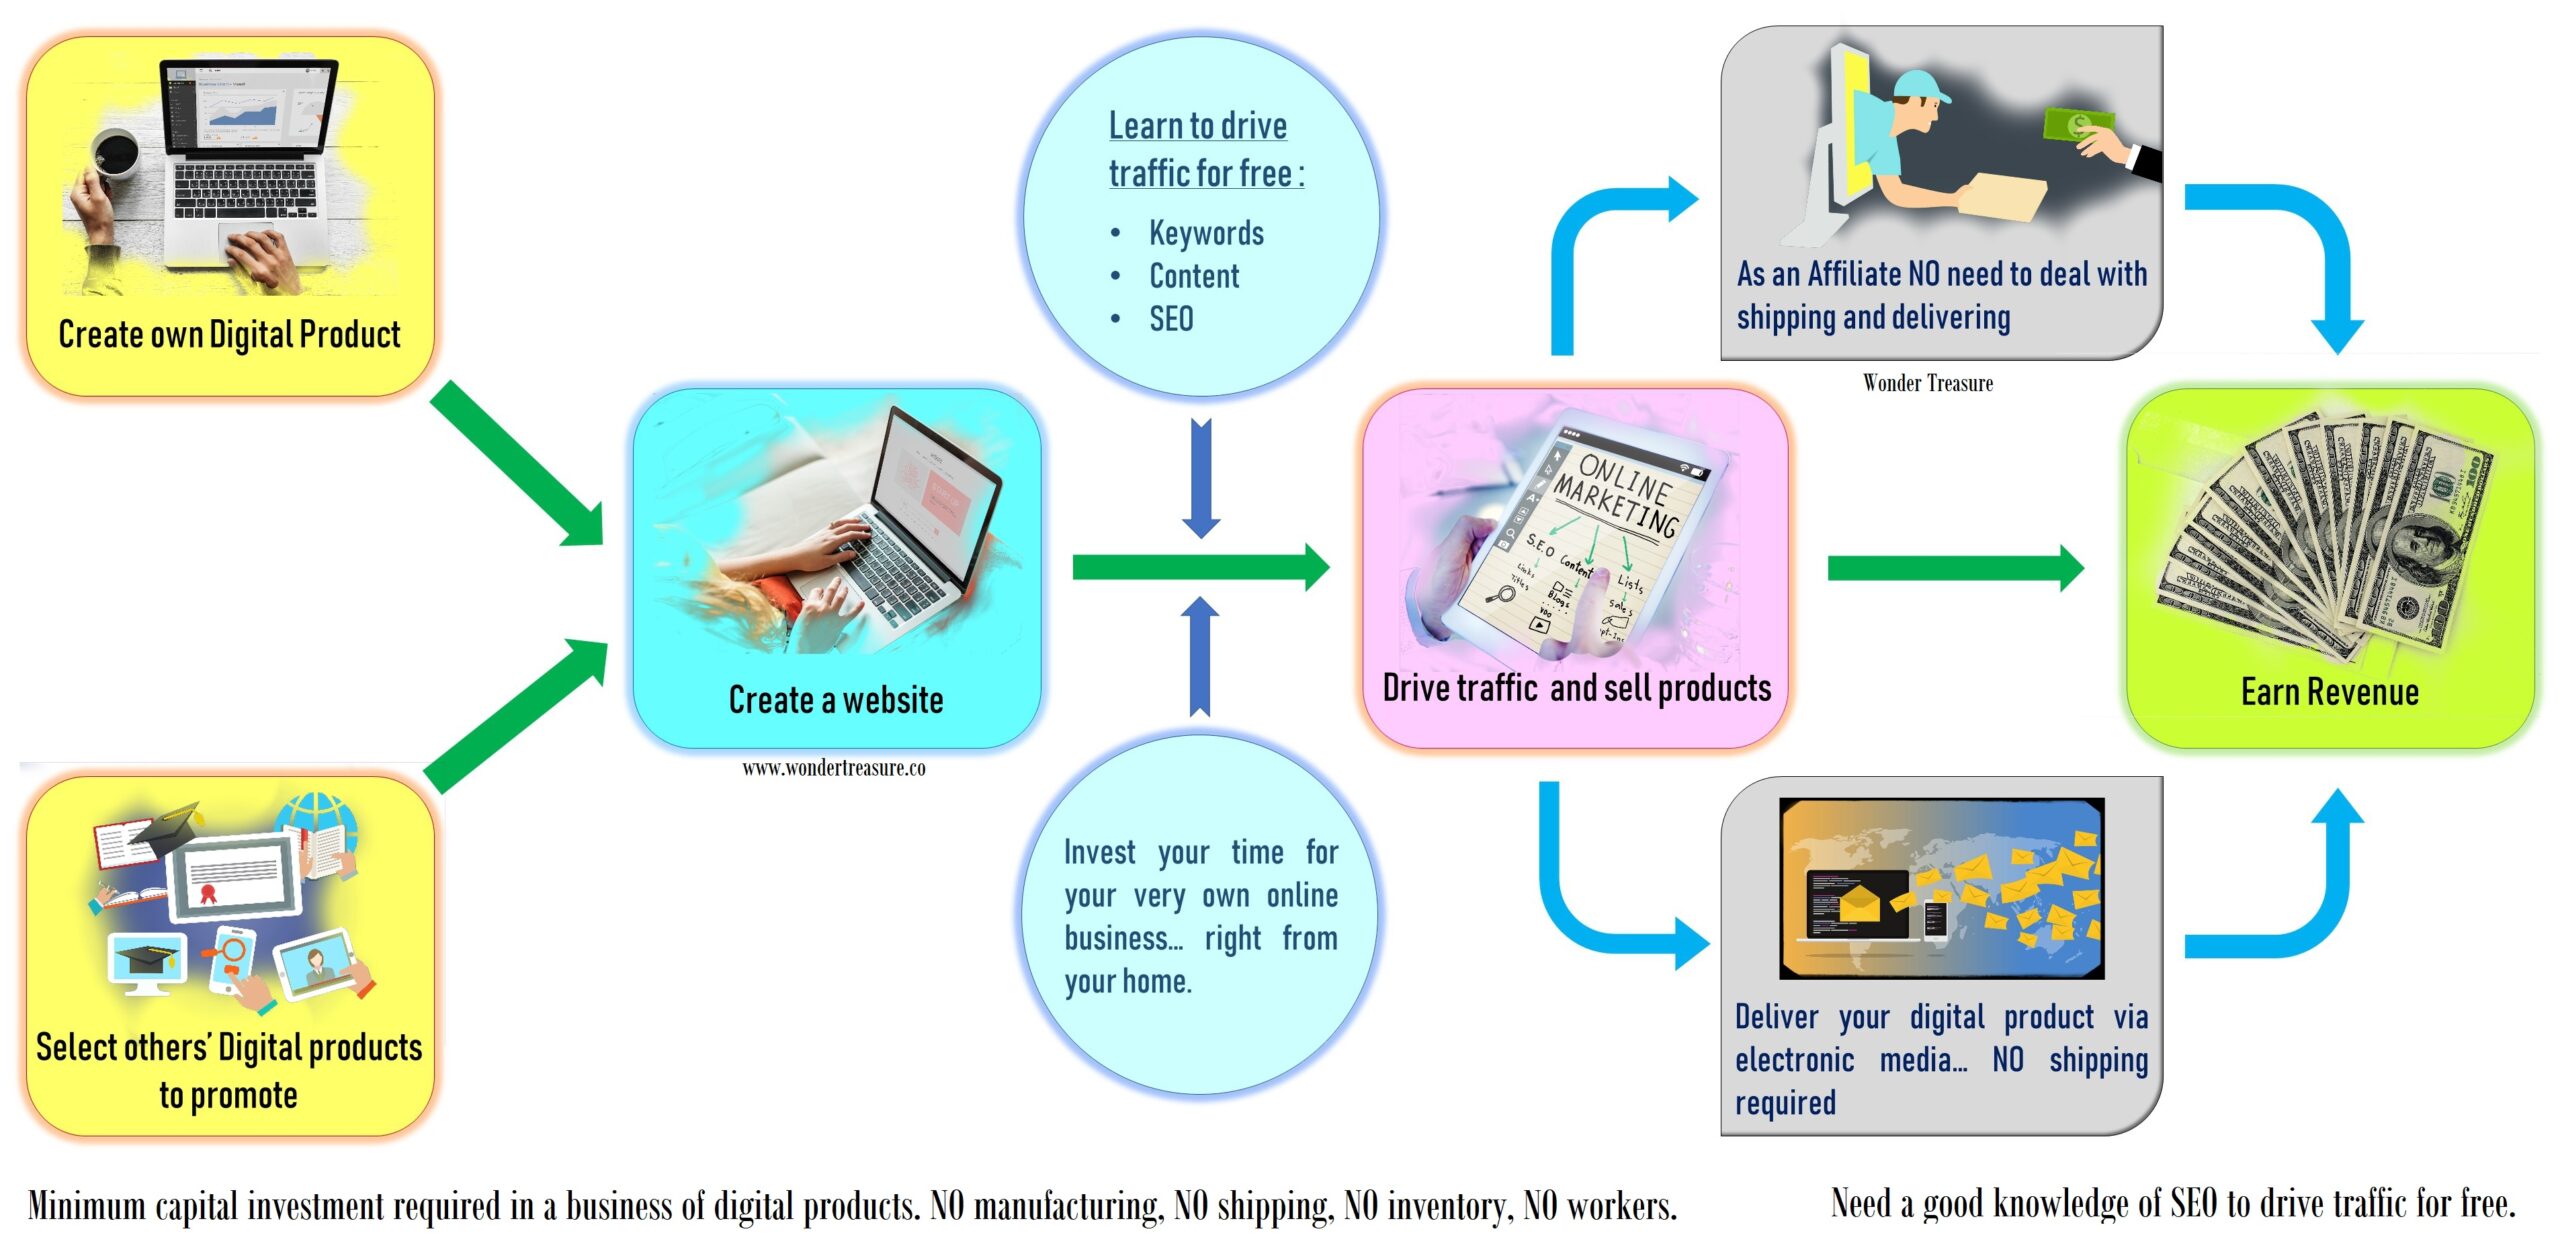 See how to make money selling digital products online.